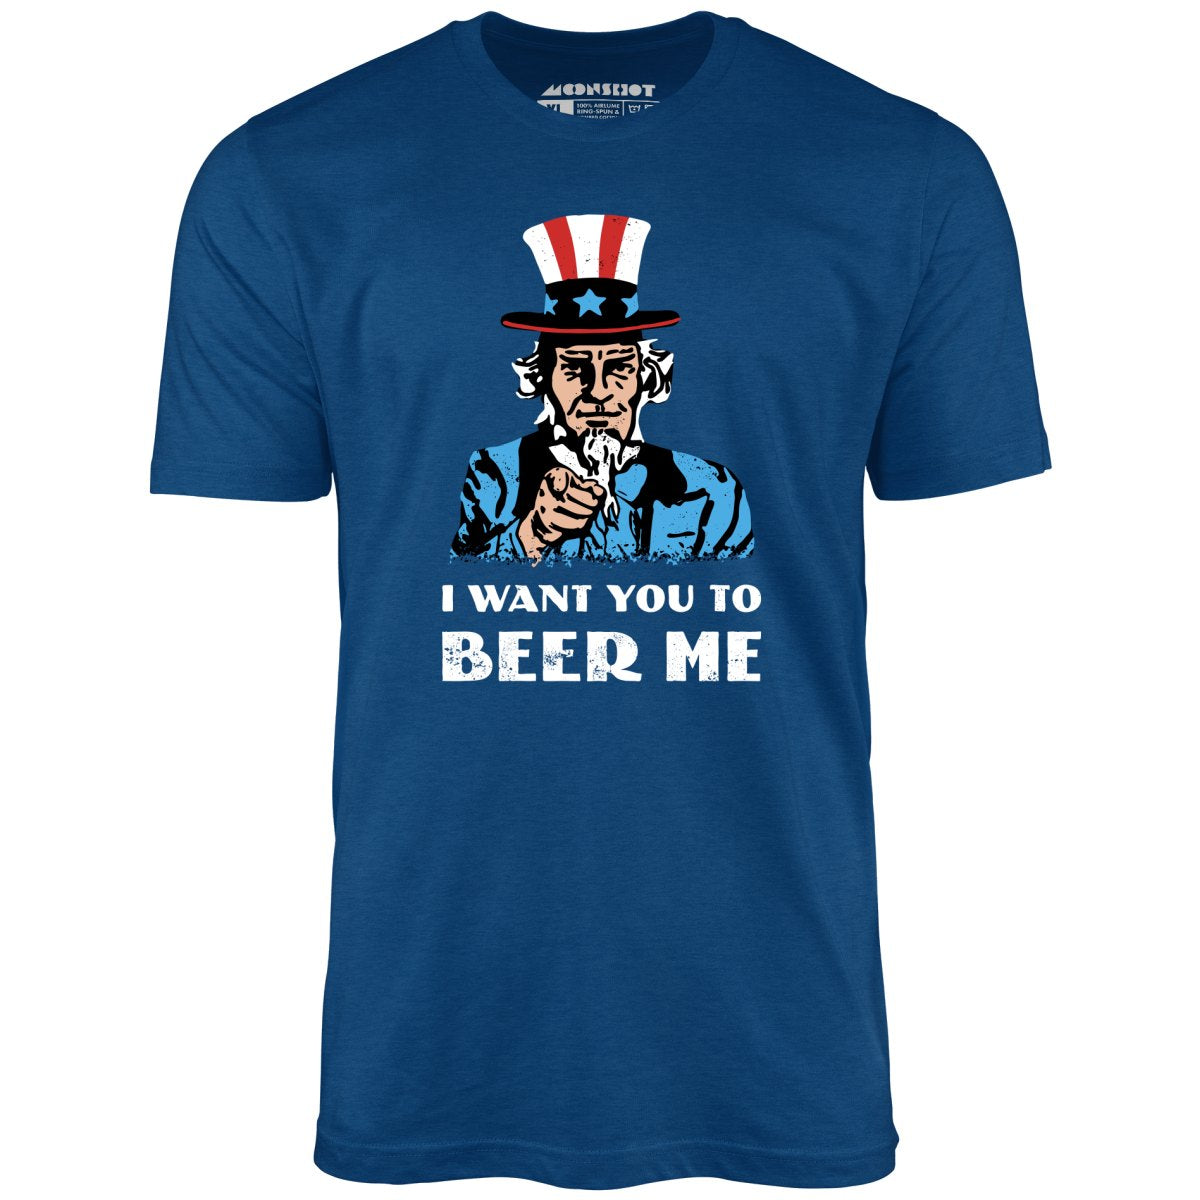 I Want You To Beer Me - Unisex T-Shirt